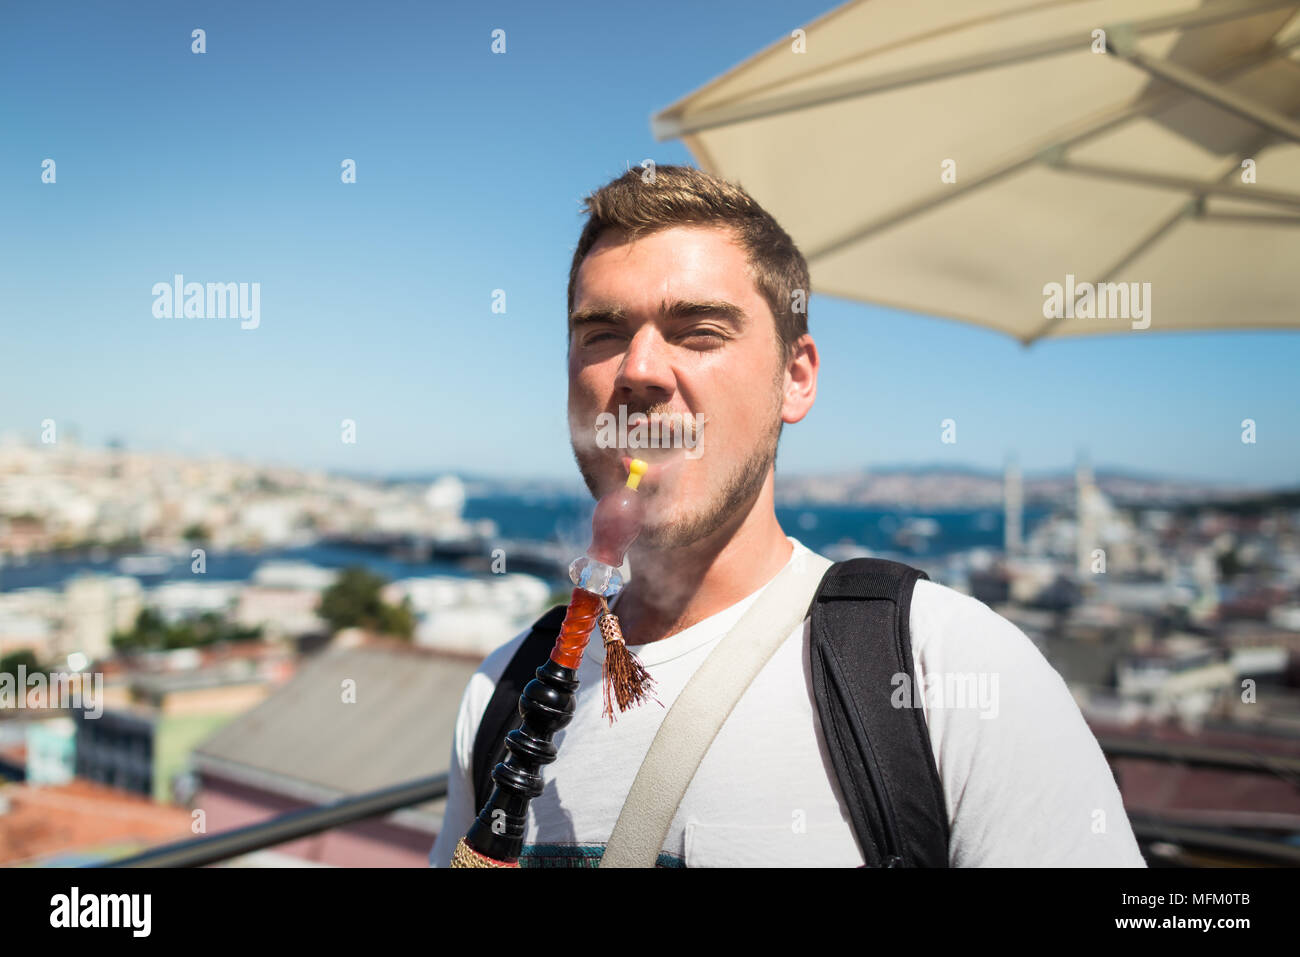 A young smiling man with mustache is smoking a hookah on the terrace overlooking the city Stock Photo